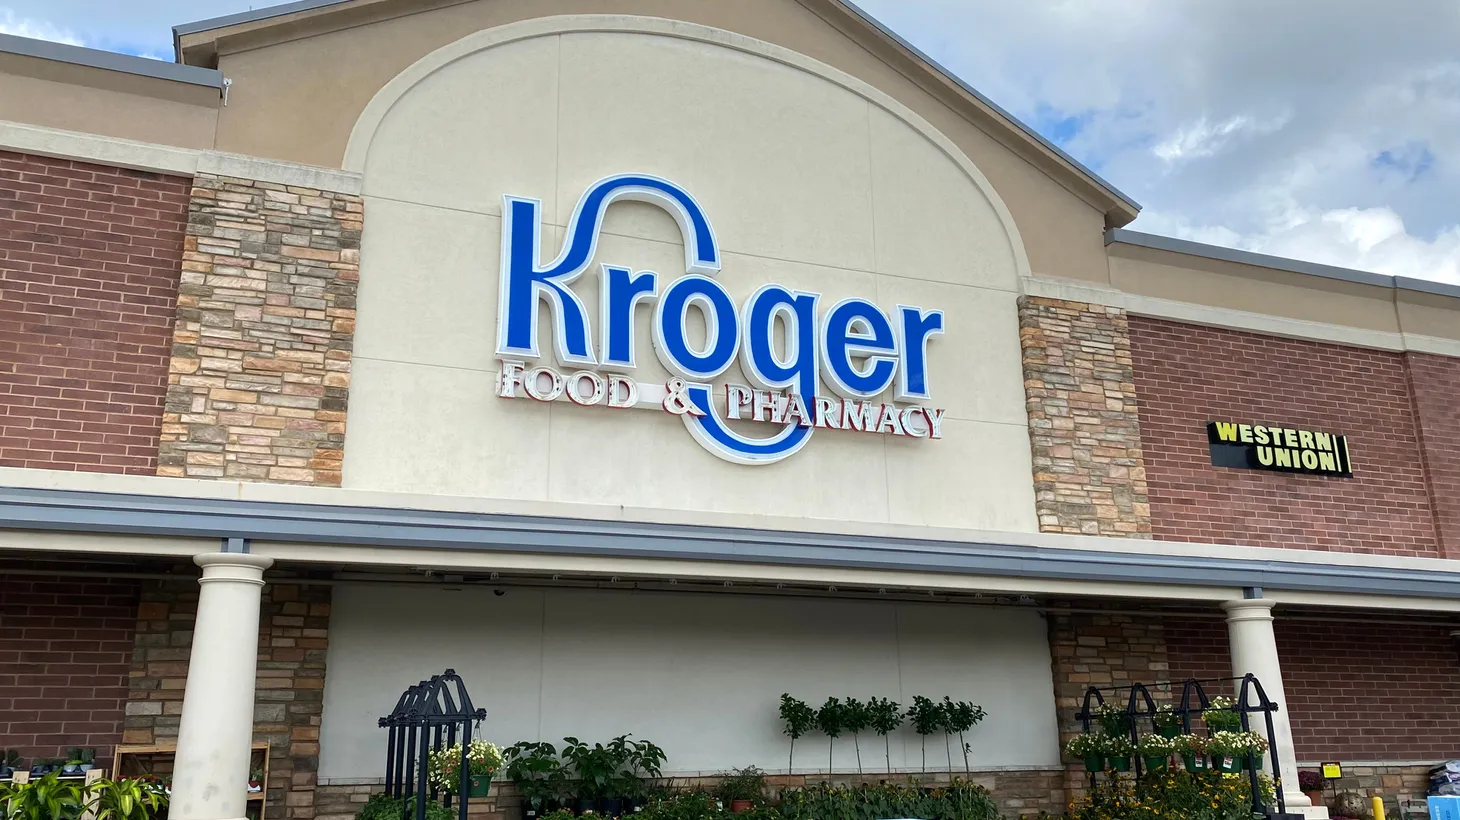 Kroger, which owns Ralphs and Food4Less, might add Vons, Pavilions, and Albertsons to its roster. The merger would need approval from the Federal Trade Commission and the Department of Justice.